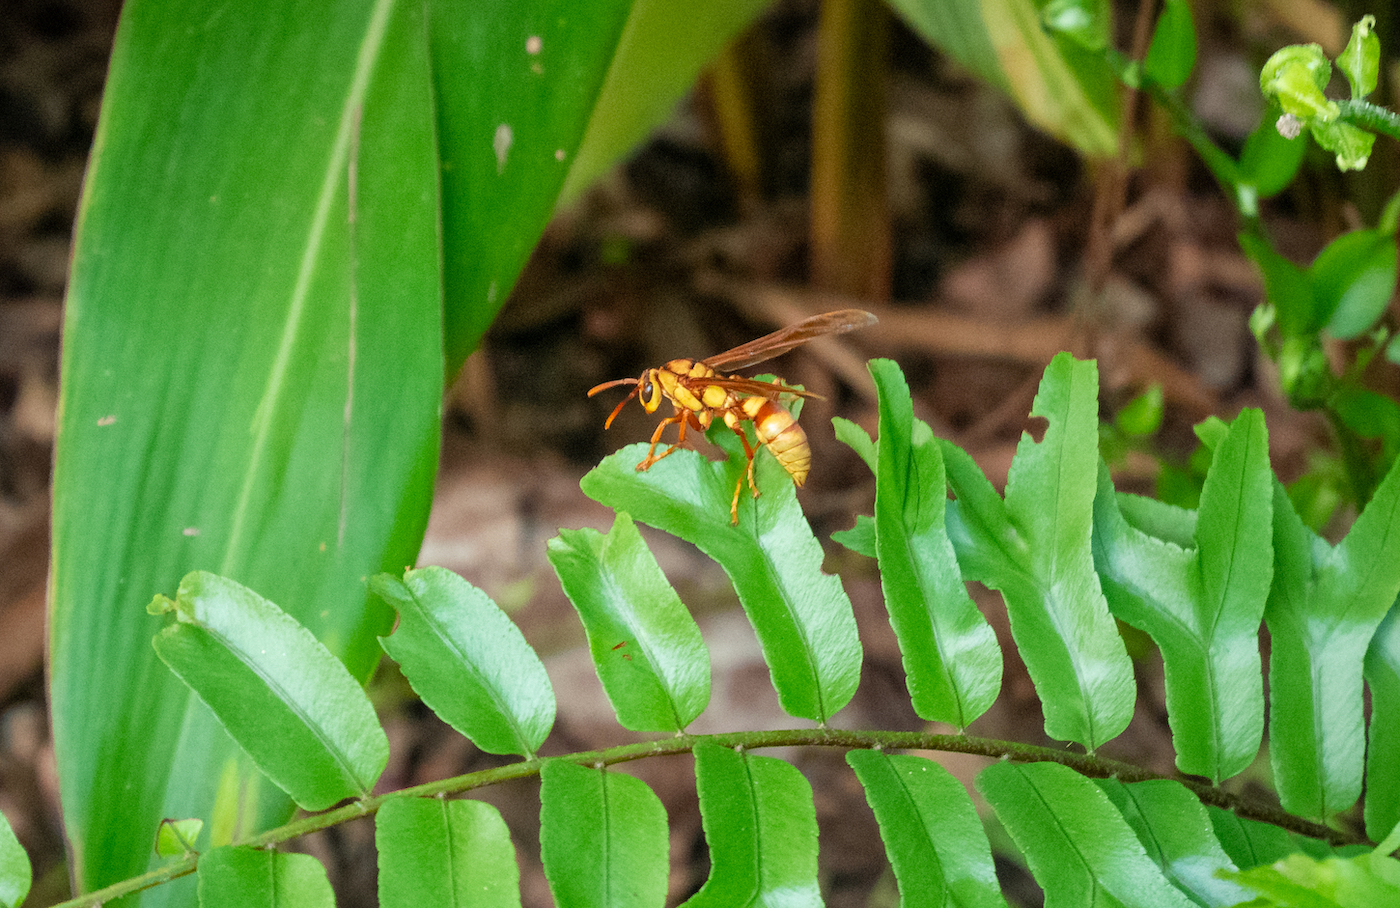 A close up of a yellow and brown wasp resting on a bright green leaf. The wasp is about two inches big, with a large stinger. 